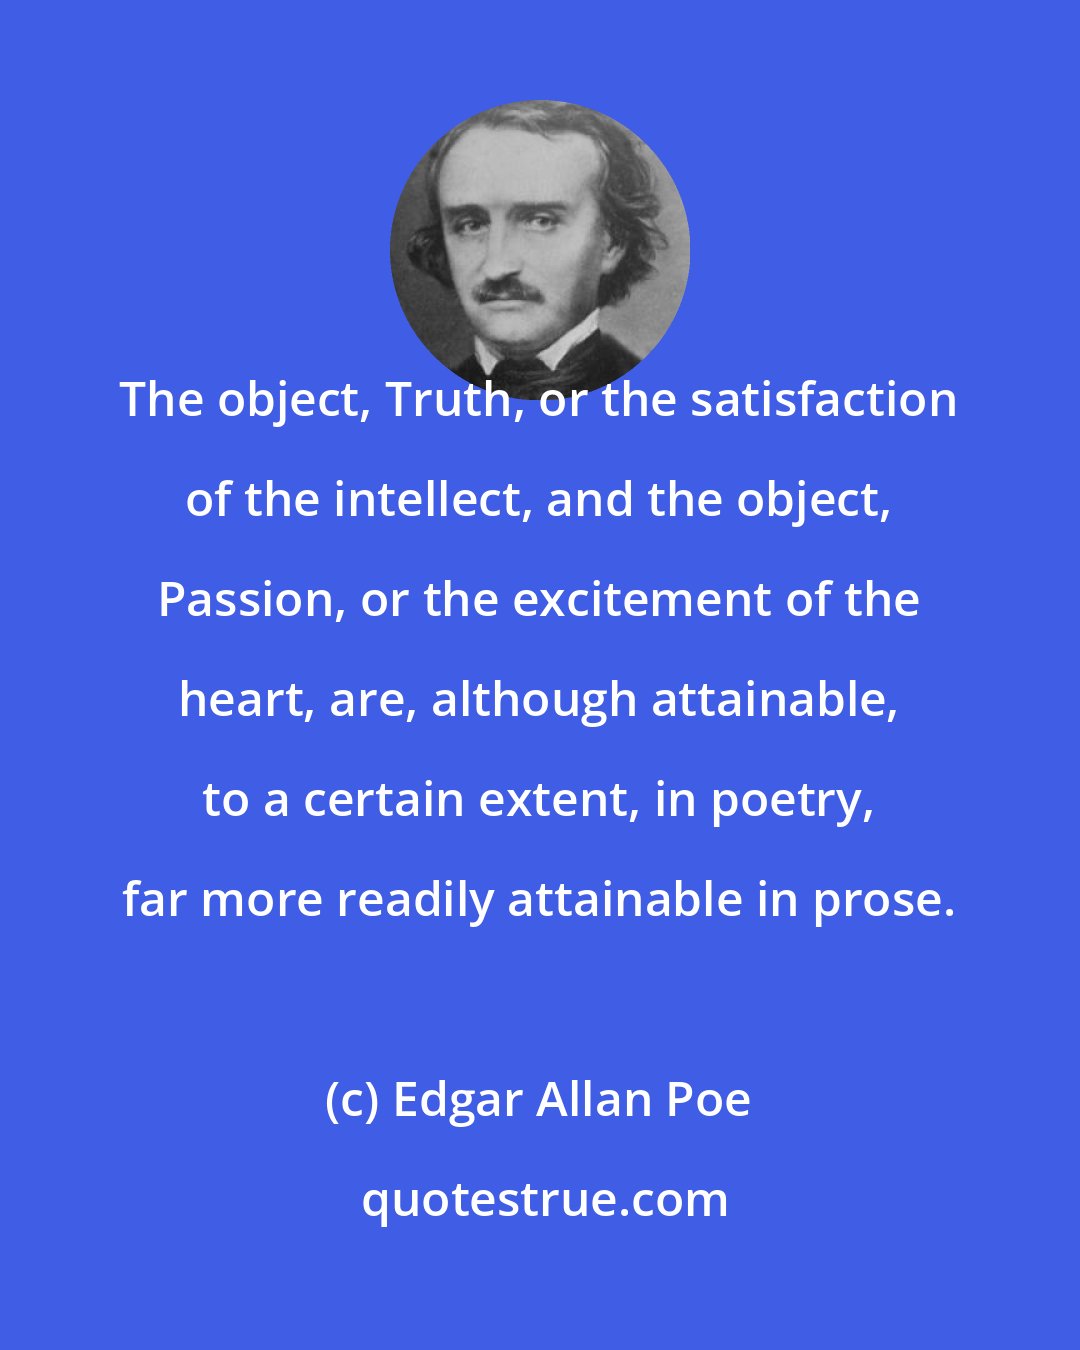 Edgar Allan Poe: The object, Truth, or the satisfaction of the intellect, and the object, Passion, or the excitement of the heart, are, although attainable, to a certain extent, in poetry, far more readily attainable in prose.